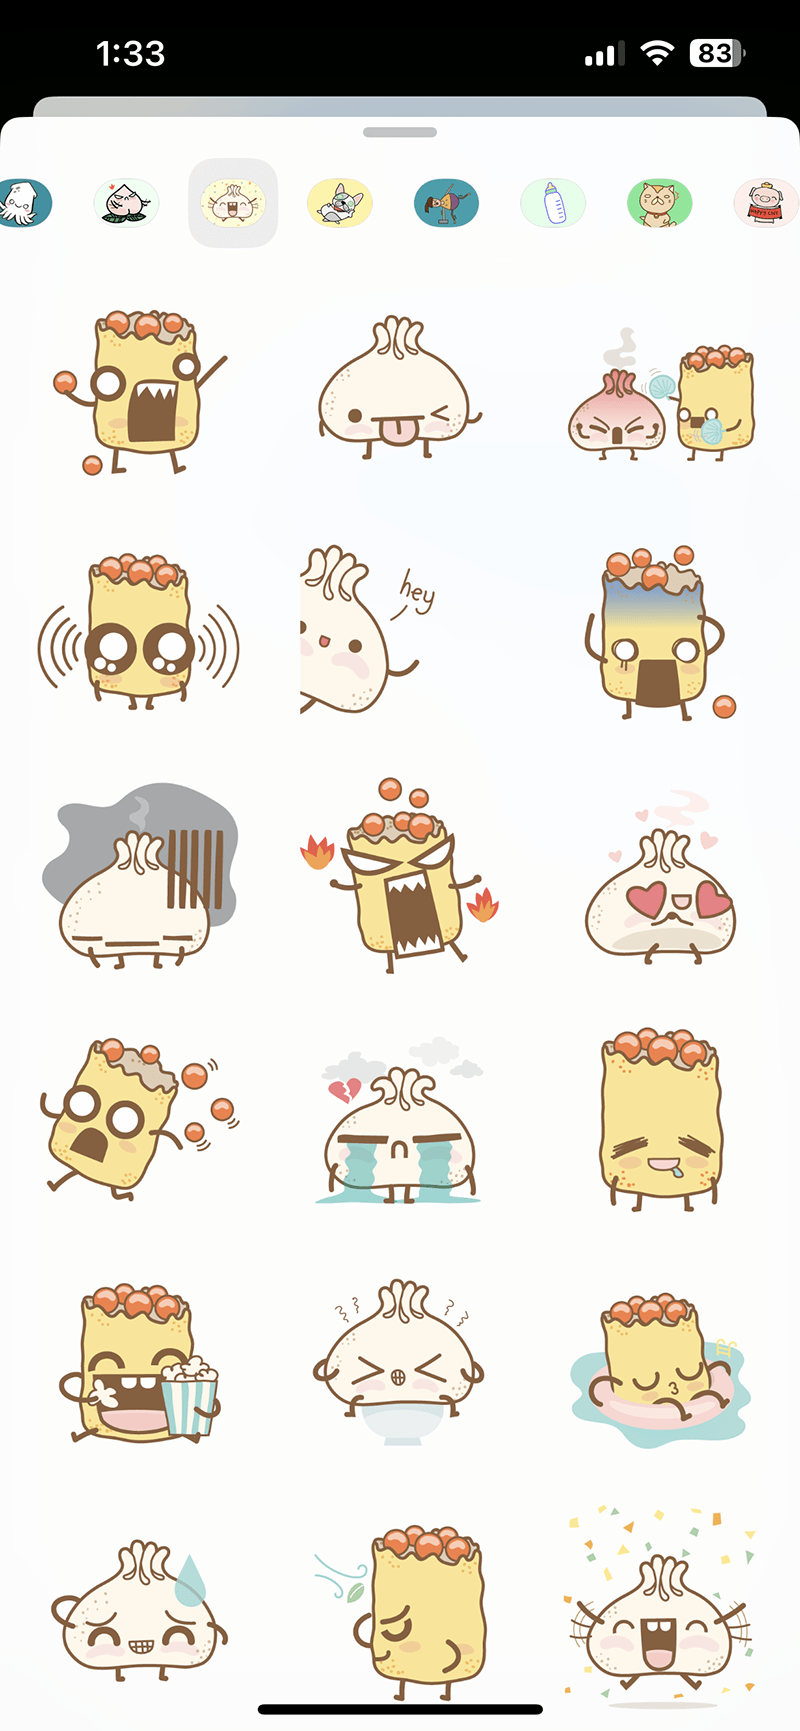 Dim and Sum stickers by Adelyn Tam